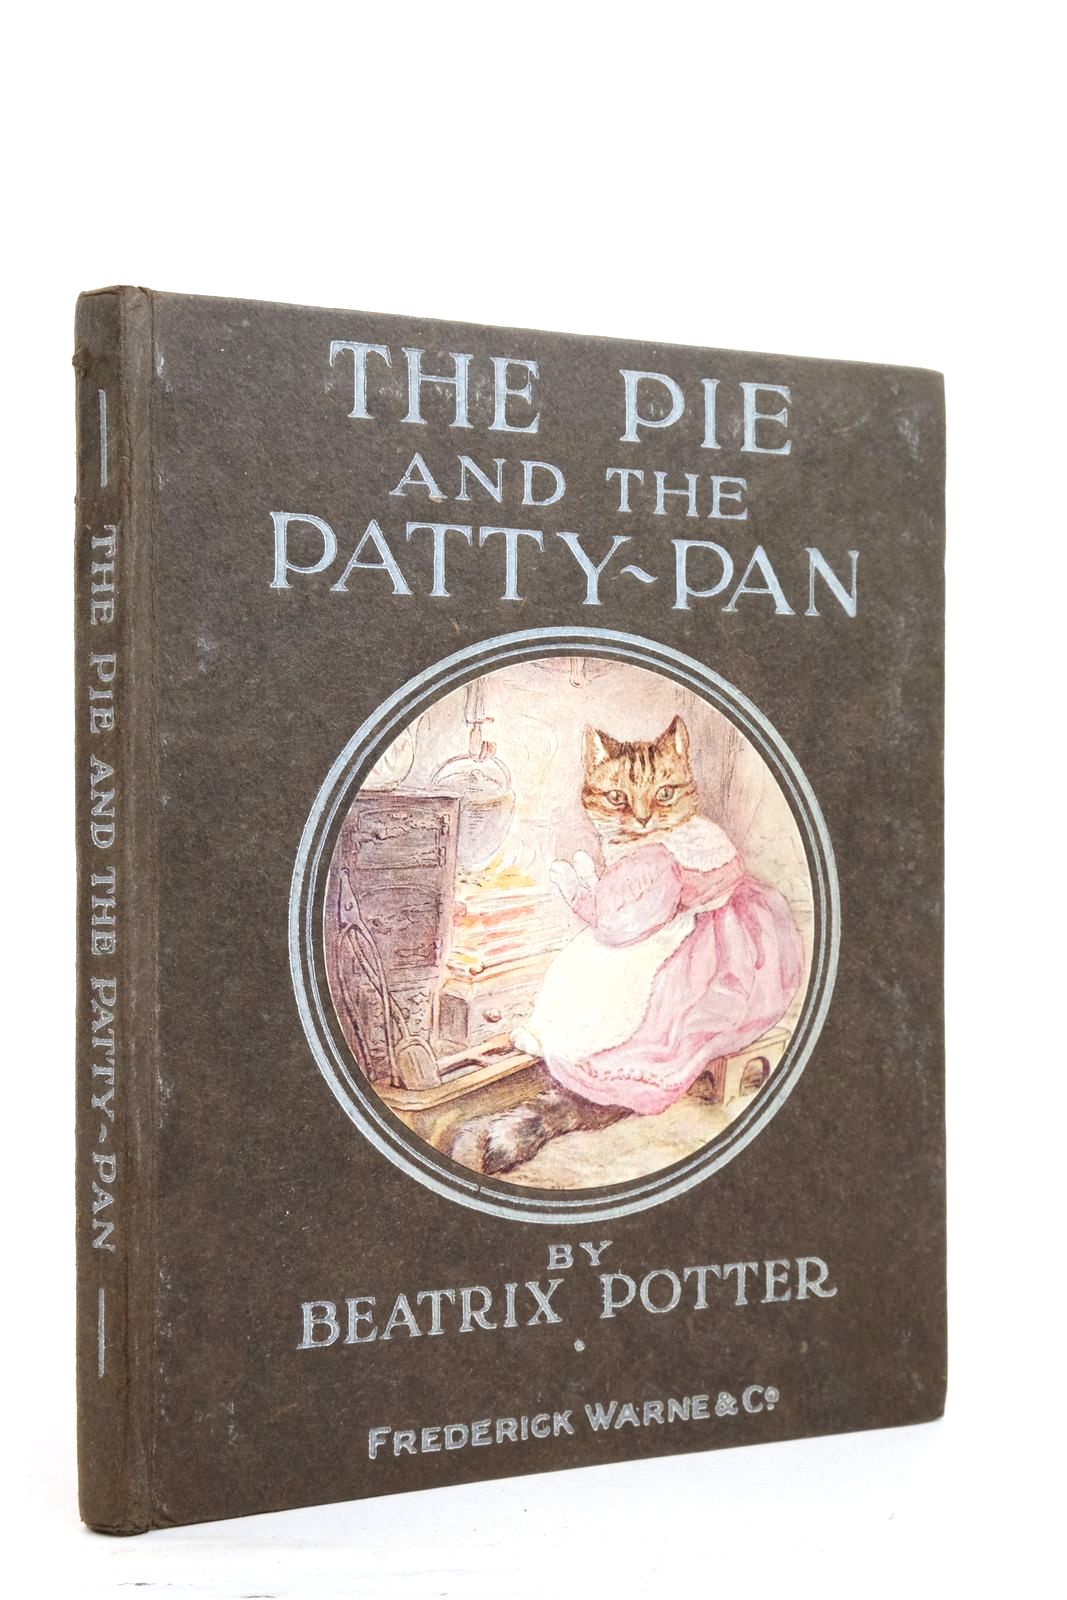 Photo of THE PIE AND THE PATTY PAN written by Potter, Beatrix illustrated by Potter, Beatrix published by Frederick Warne & Co. (STOCK CODE: 2136938)  for sale by Stella & Rose's Books